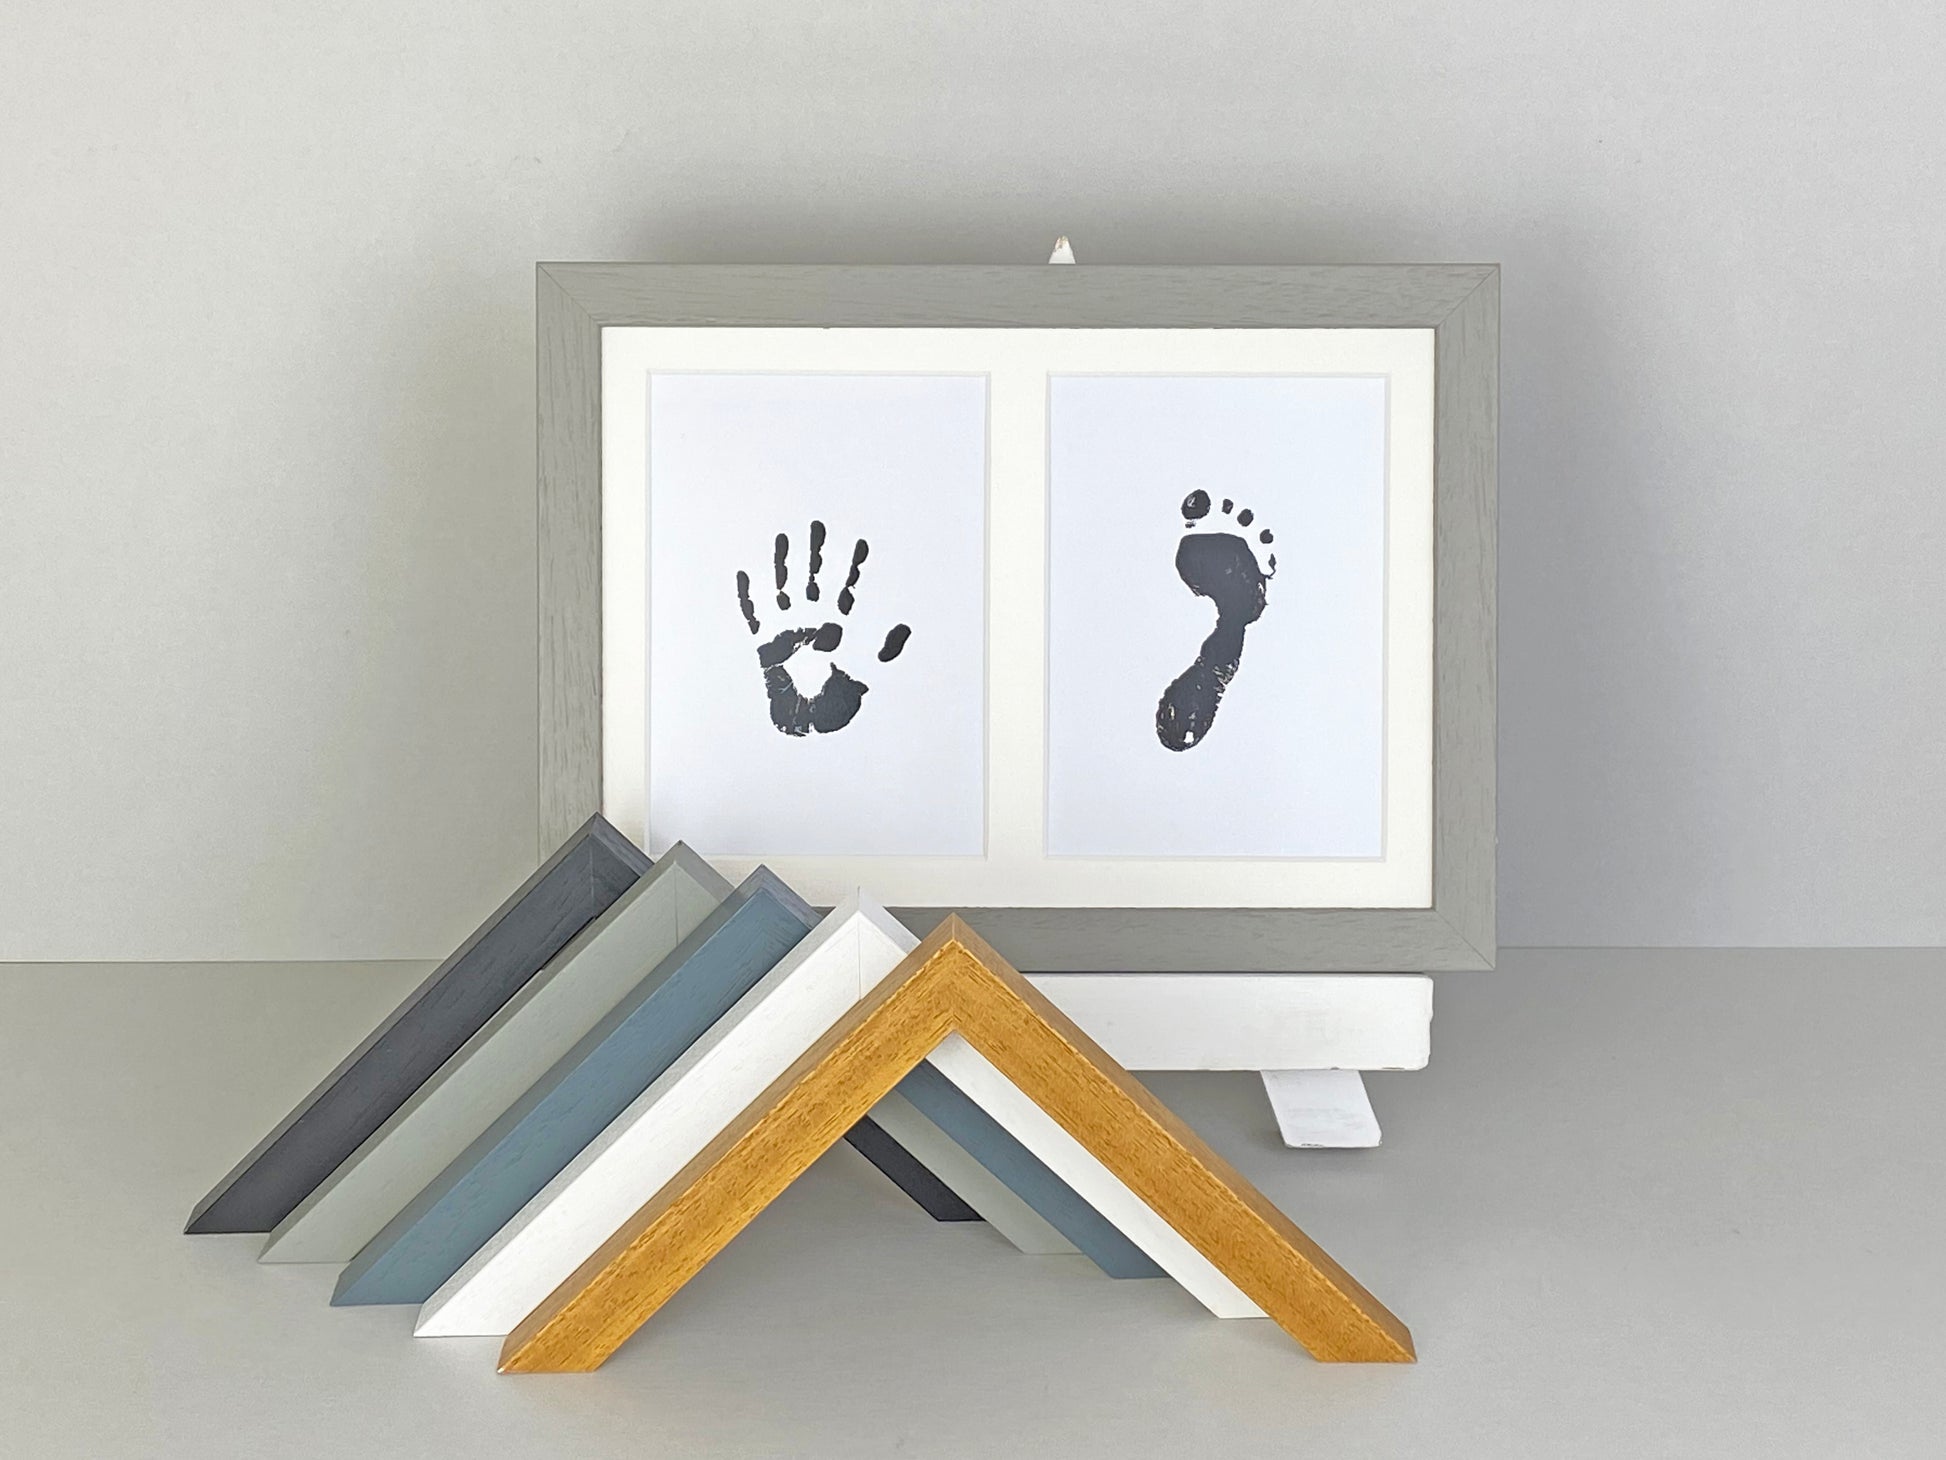 Capture The Memory Frames. Handmade Photo Frame for Baby's Hand&Foot Prints, Inkless kit included. A4. A Perfect Gift for New Parents. - PhotoFramesandMore - Wooden Picture Frames